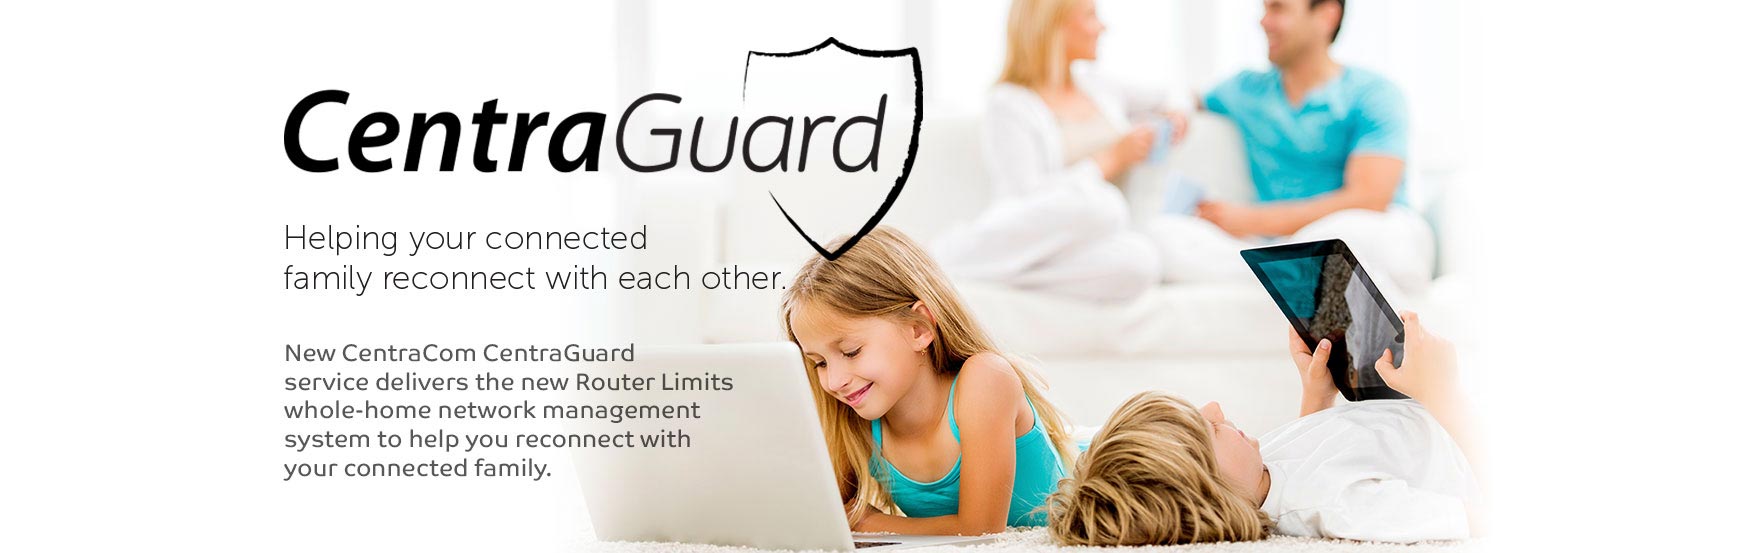 CentraGuard: Helping your connected family reconnect with each other